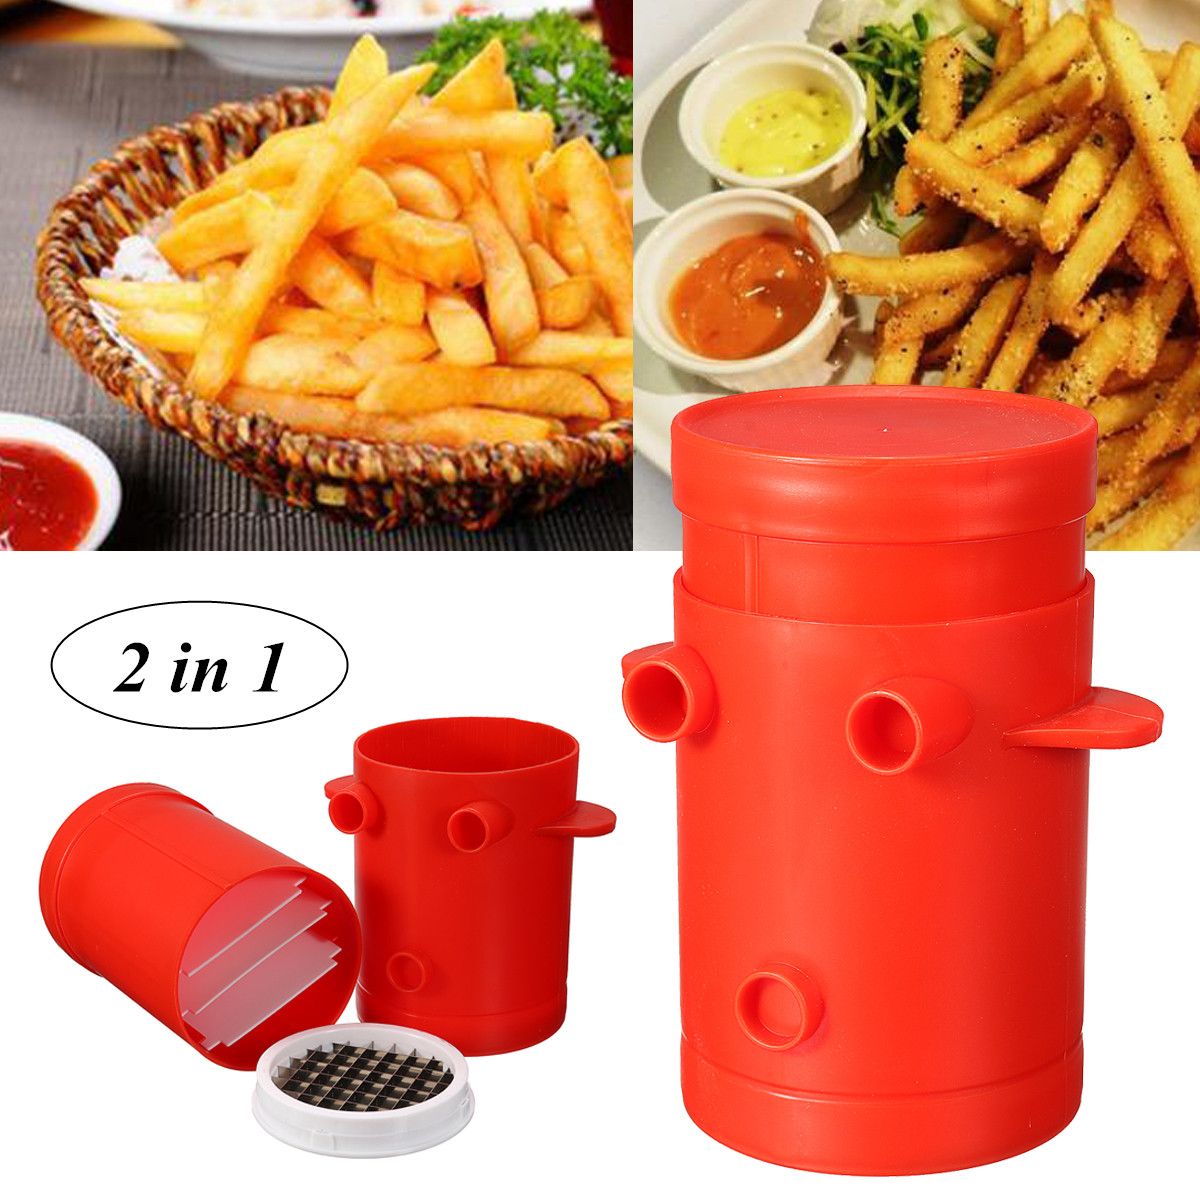 2-in1-Instant-Jiffy-Fries-Maker-Microwave-Potato-Slicer-French-Fries-Maker-Cutter-1380123